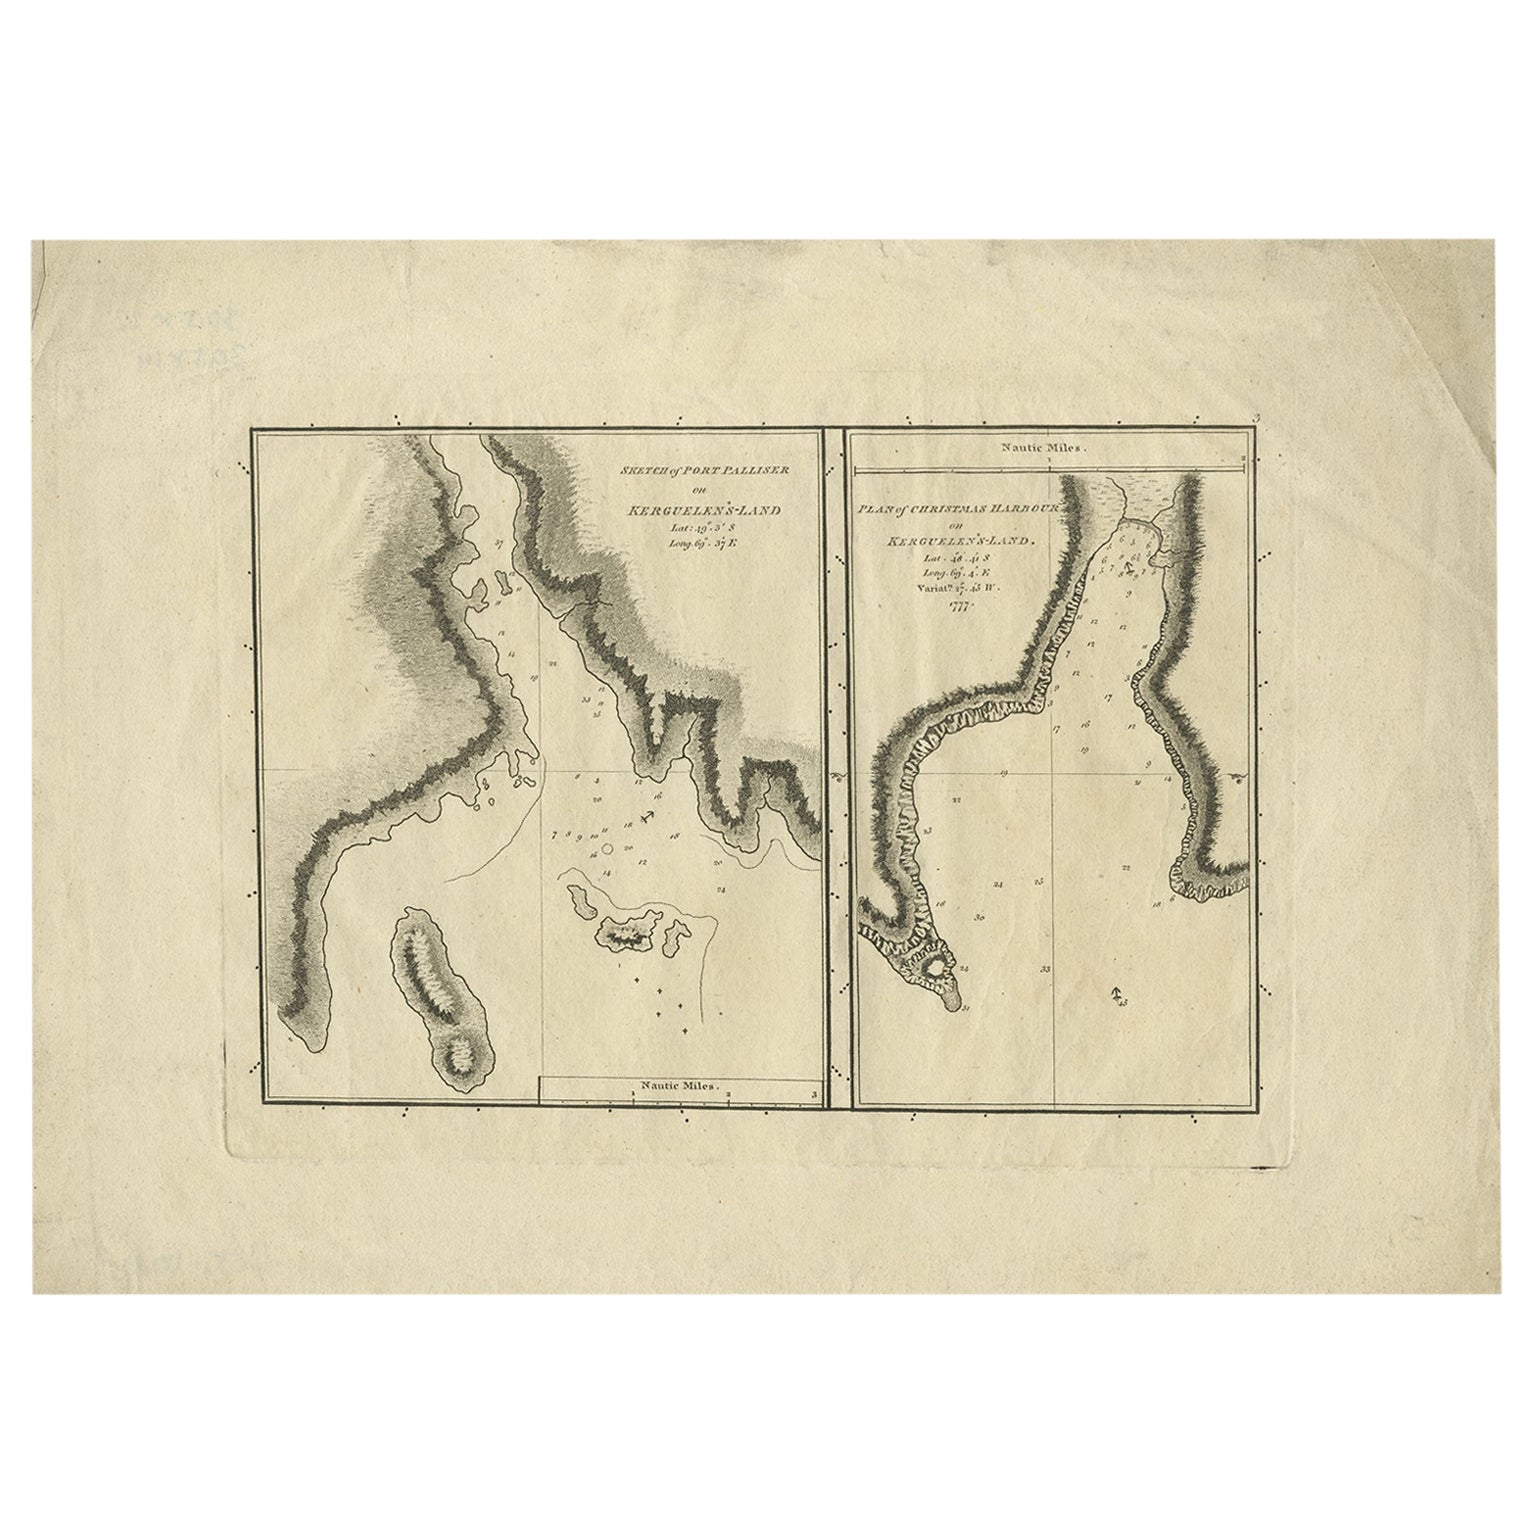 Antique Map of Port Pallisers & Kersmis by Cook, 1784